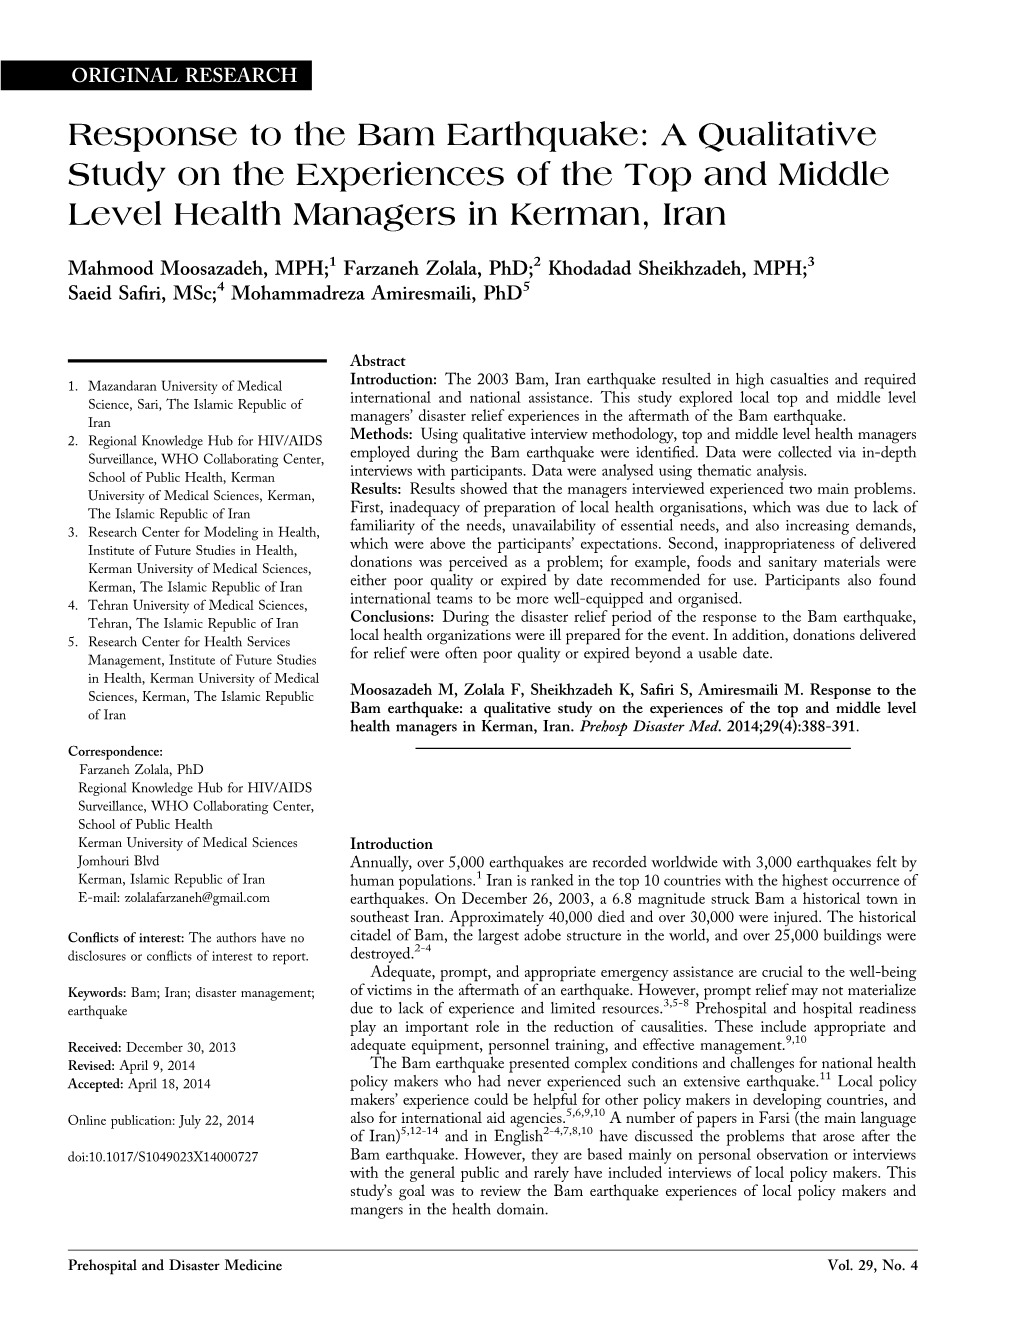 Response to the Bam Earthquake: a Qualitative Study on the Experiences of the Top and Middle Level Health Managers in Kerman, Iran